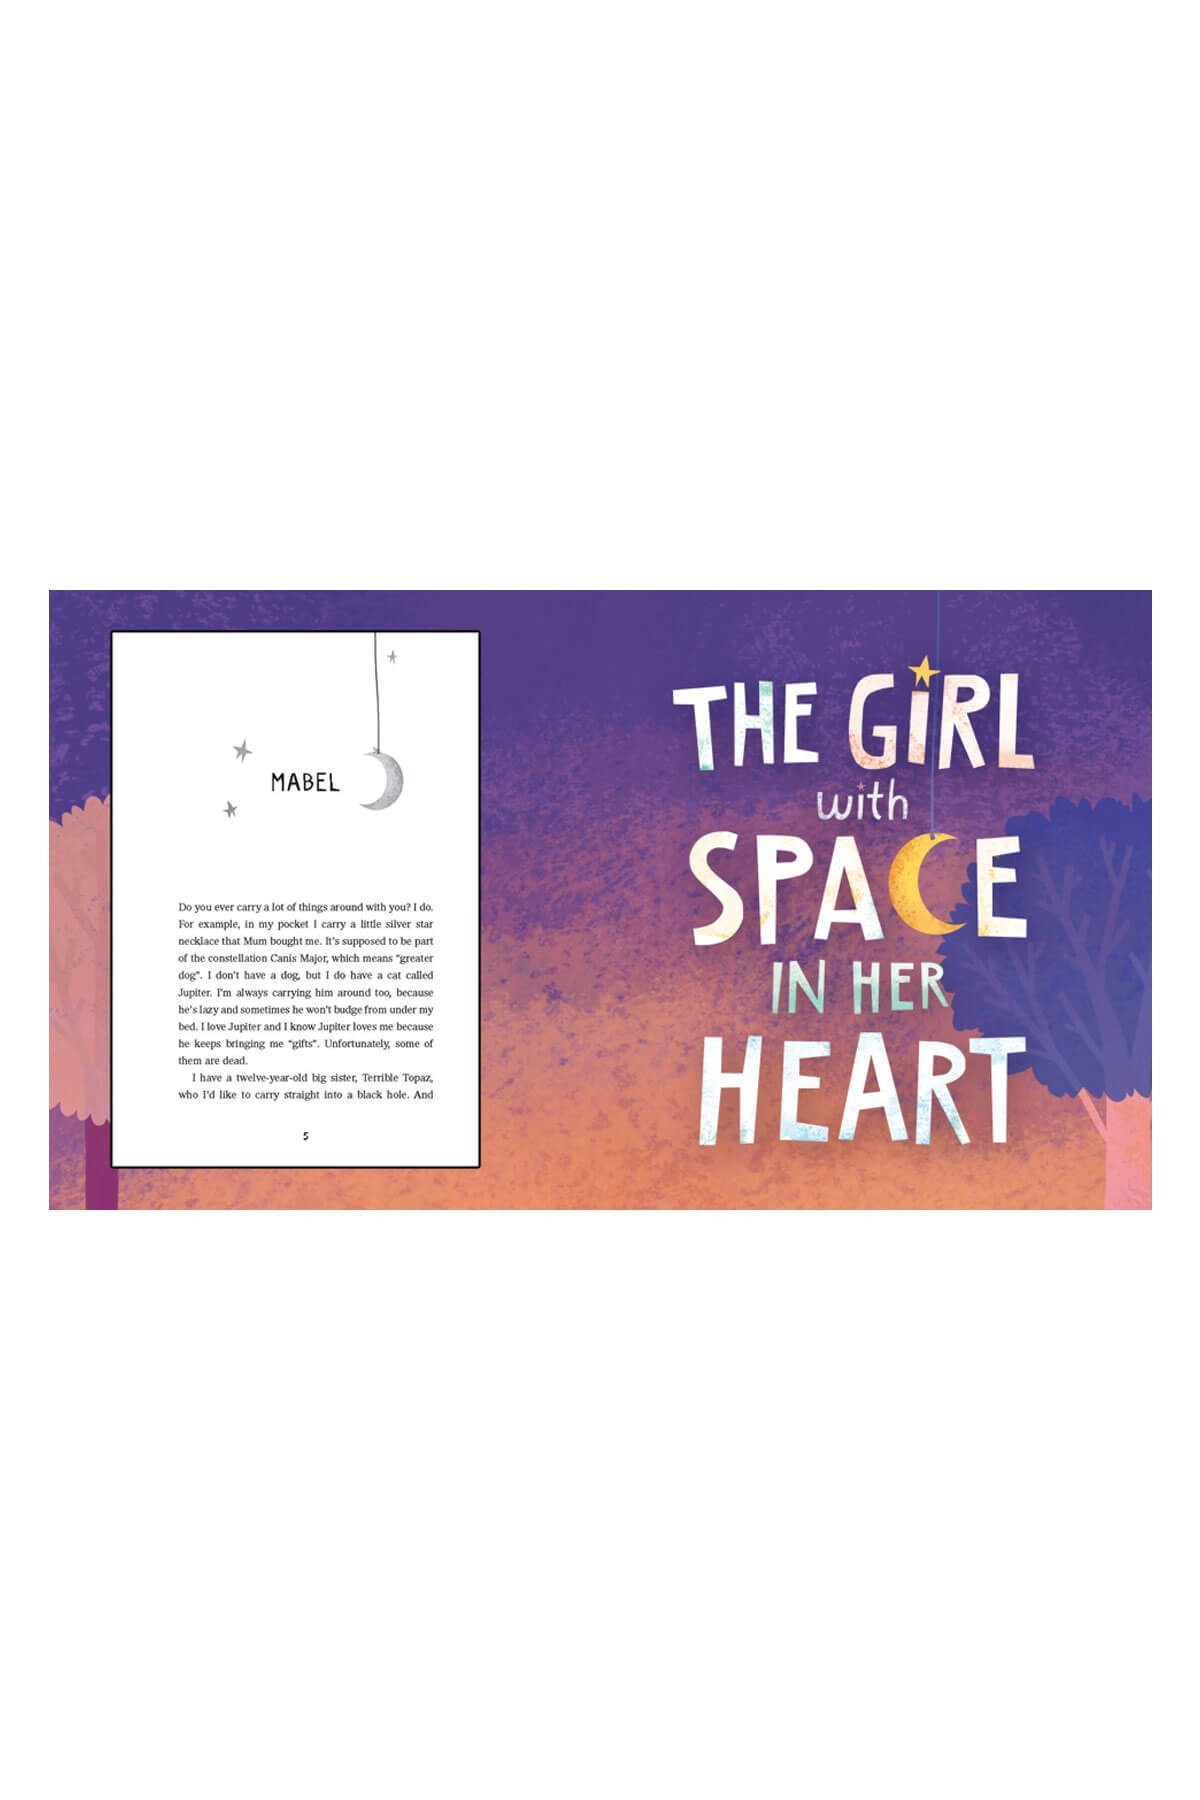 The Usborne The Girl With Space In Her Heart